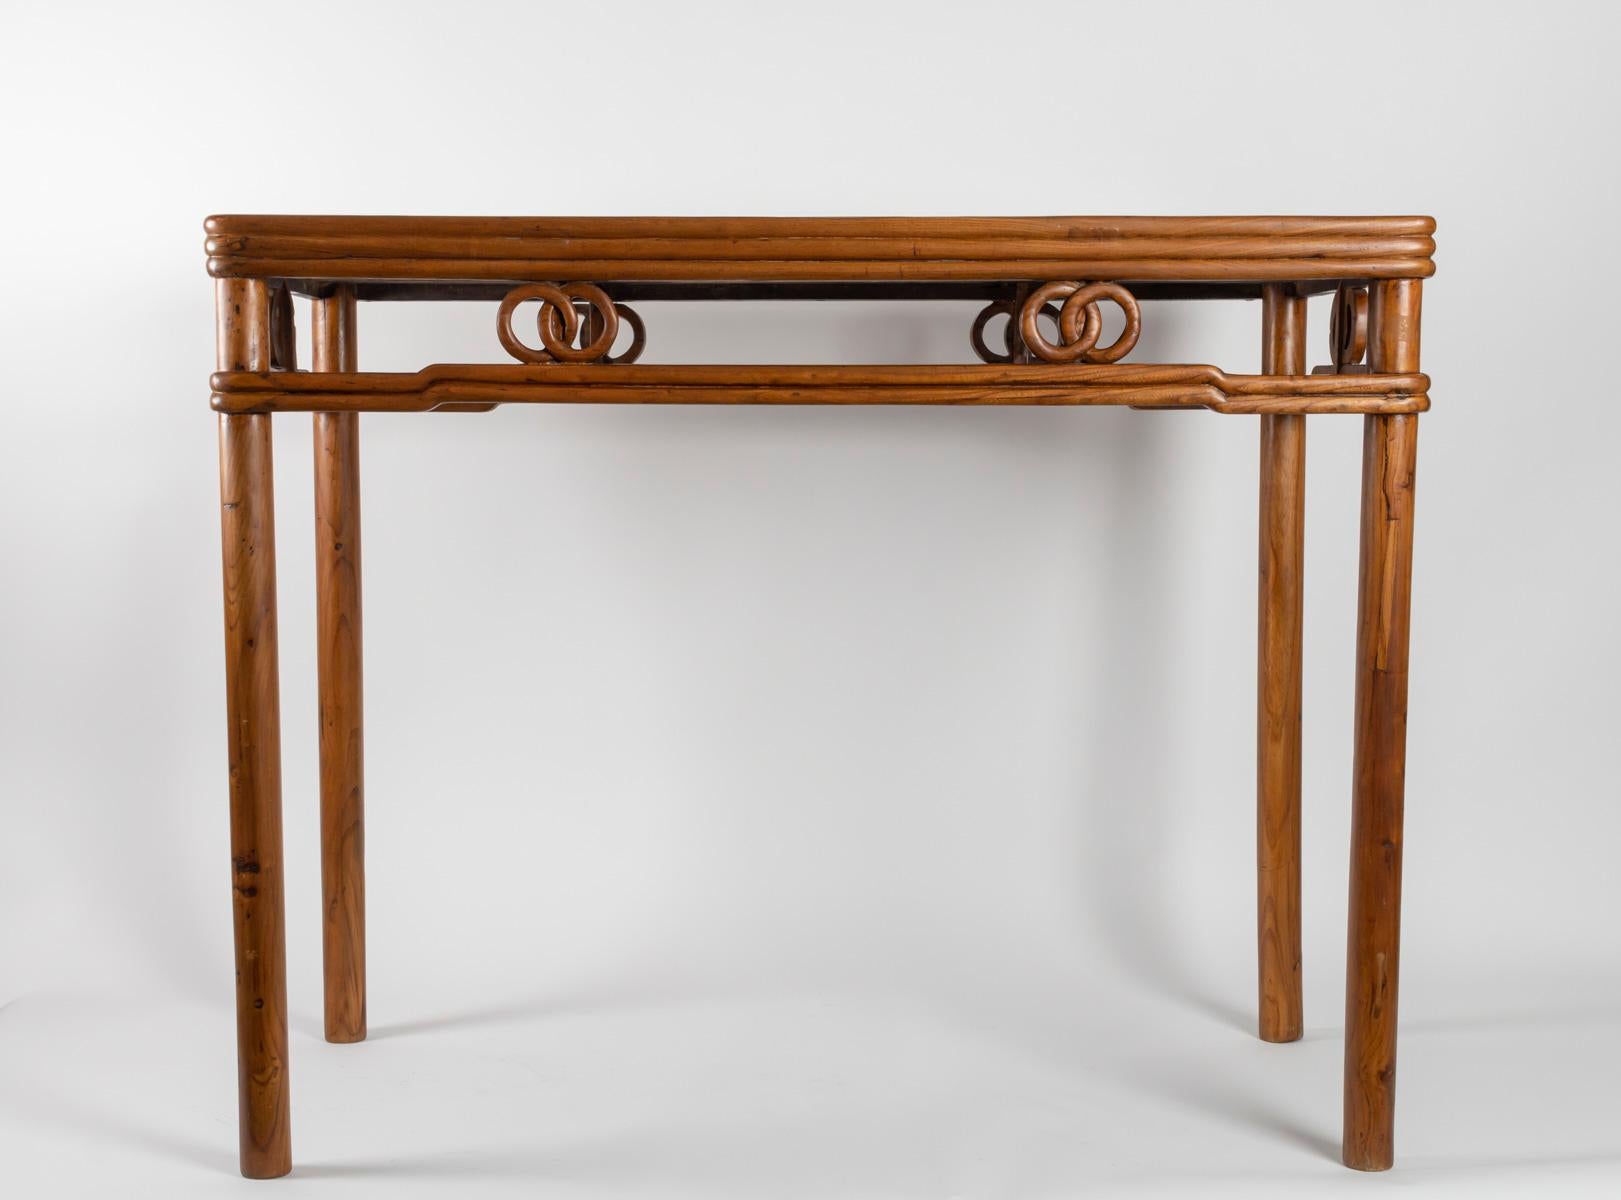 Chinese Export Light Fruit Wood Table with Rings Decor on Belt, China, 1900